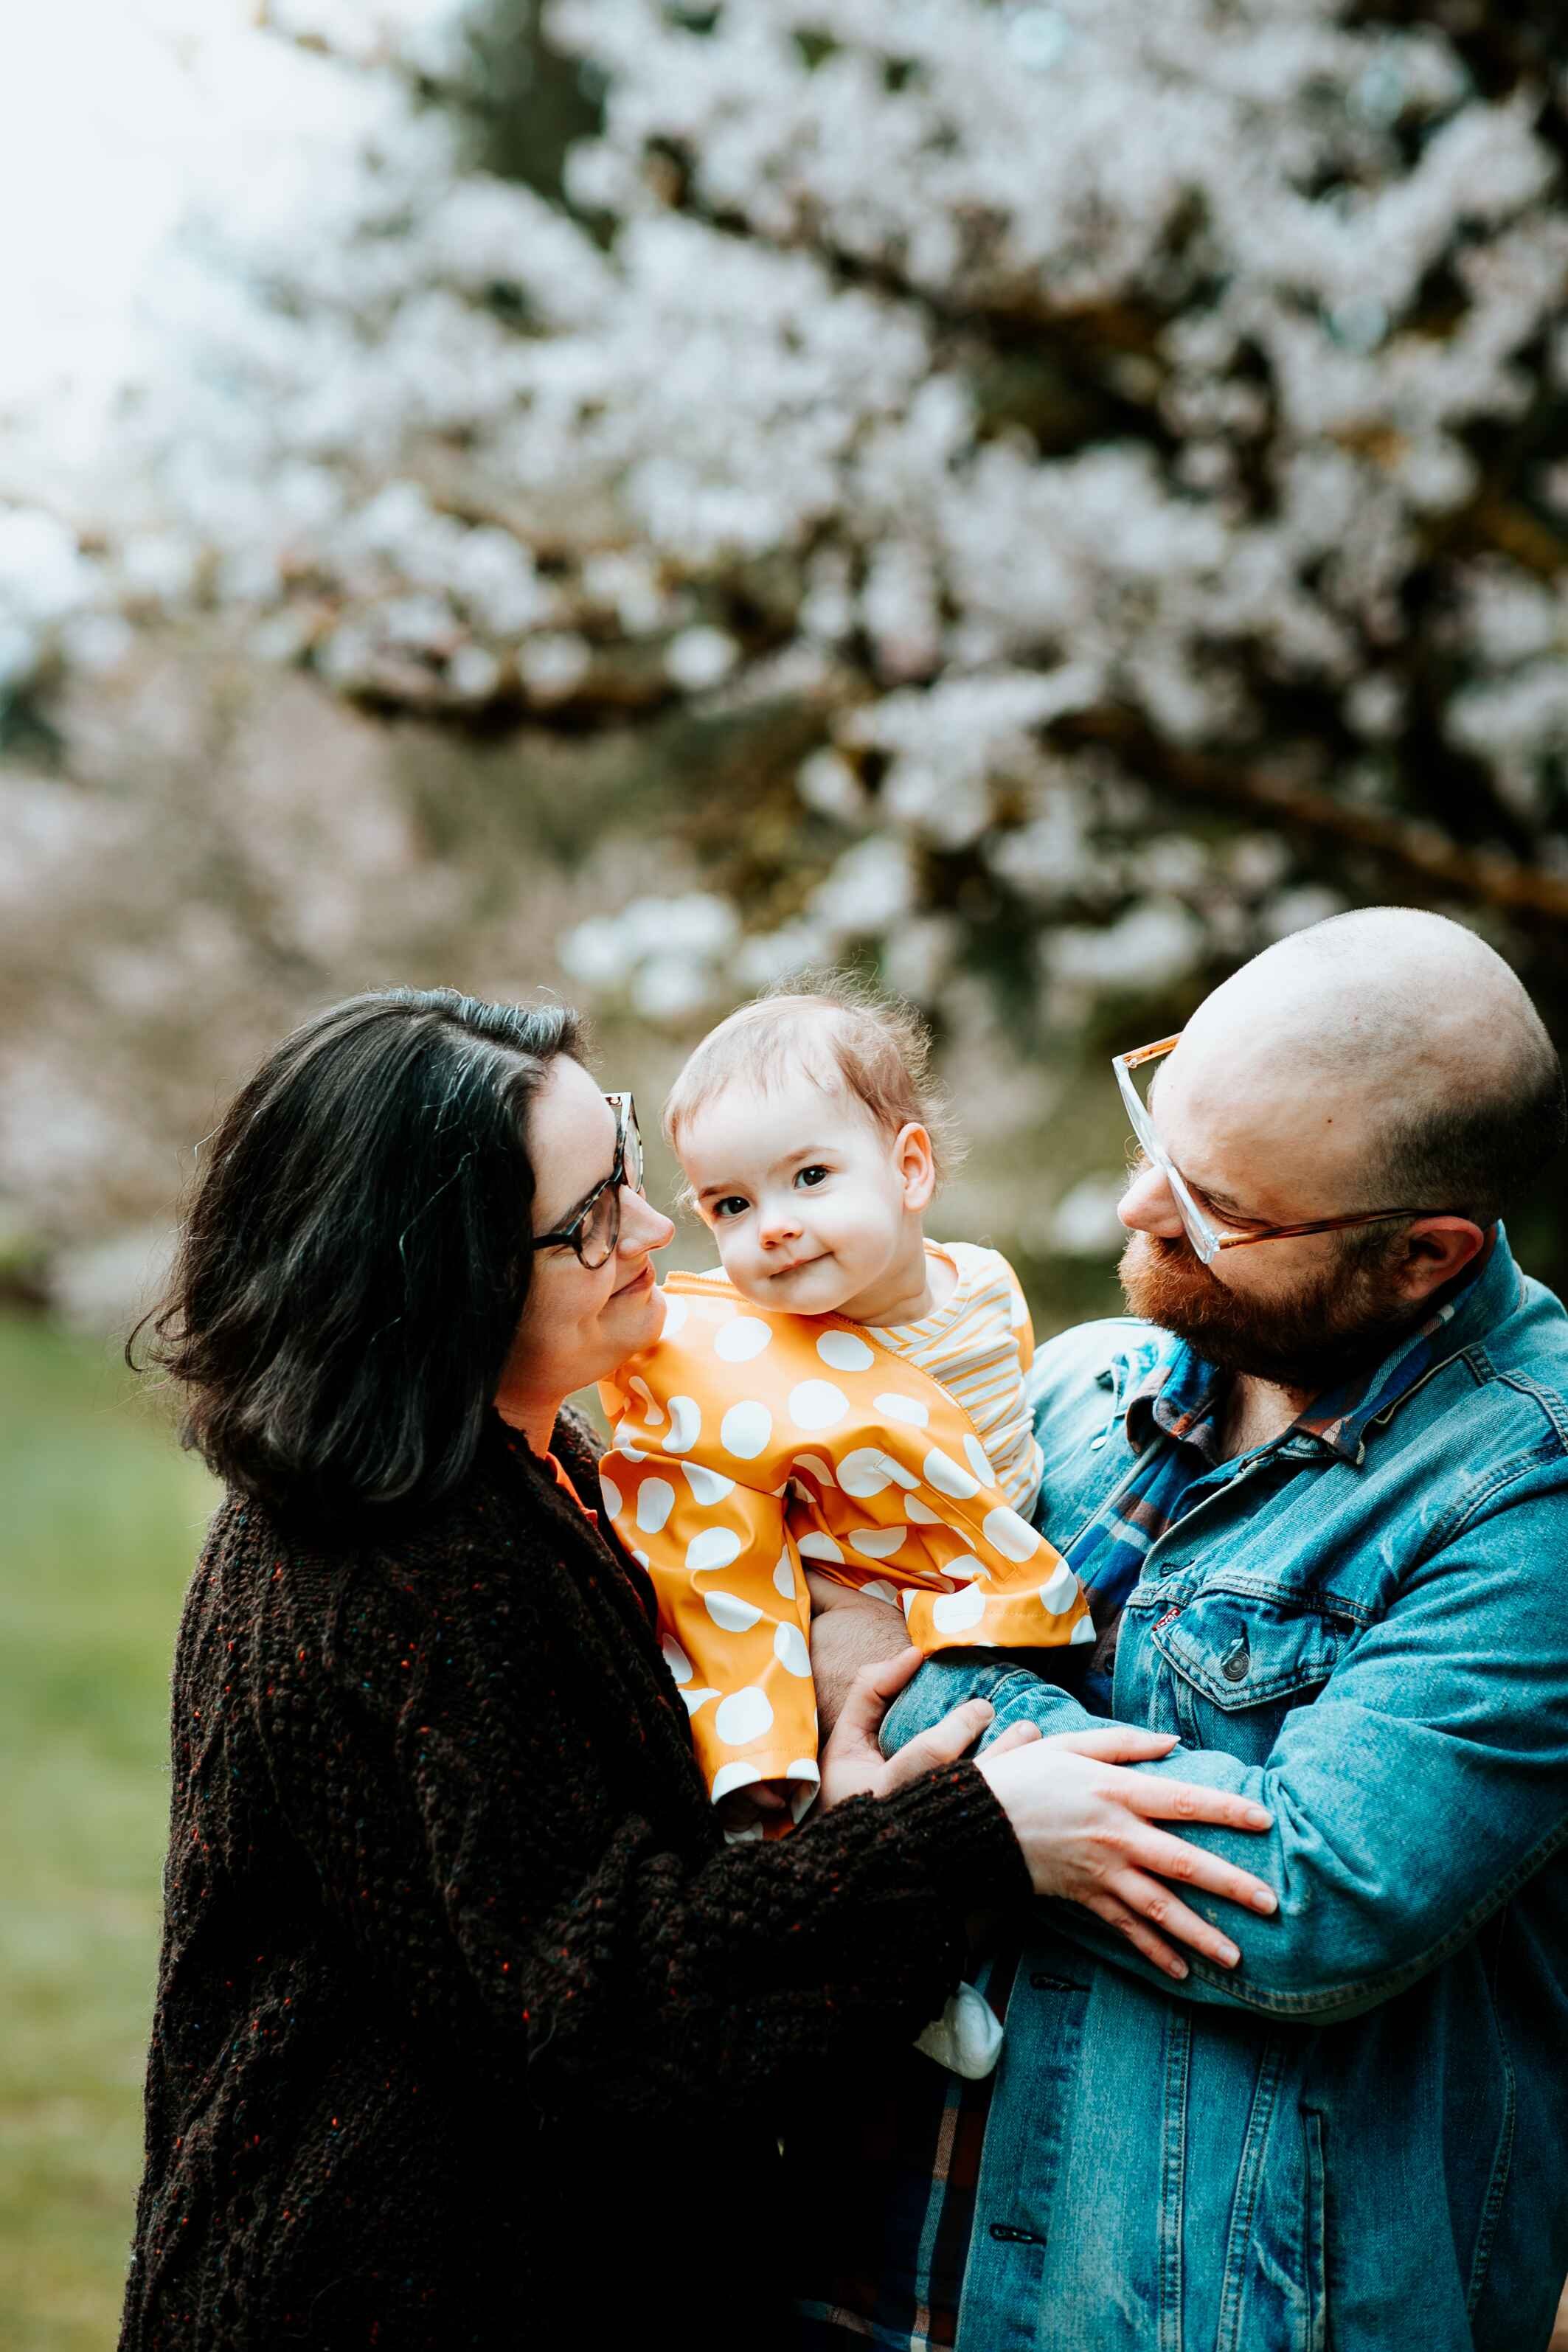 seattle lifestyle photographer - cherry blossom mini sessions (Copy)